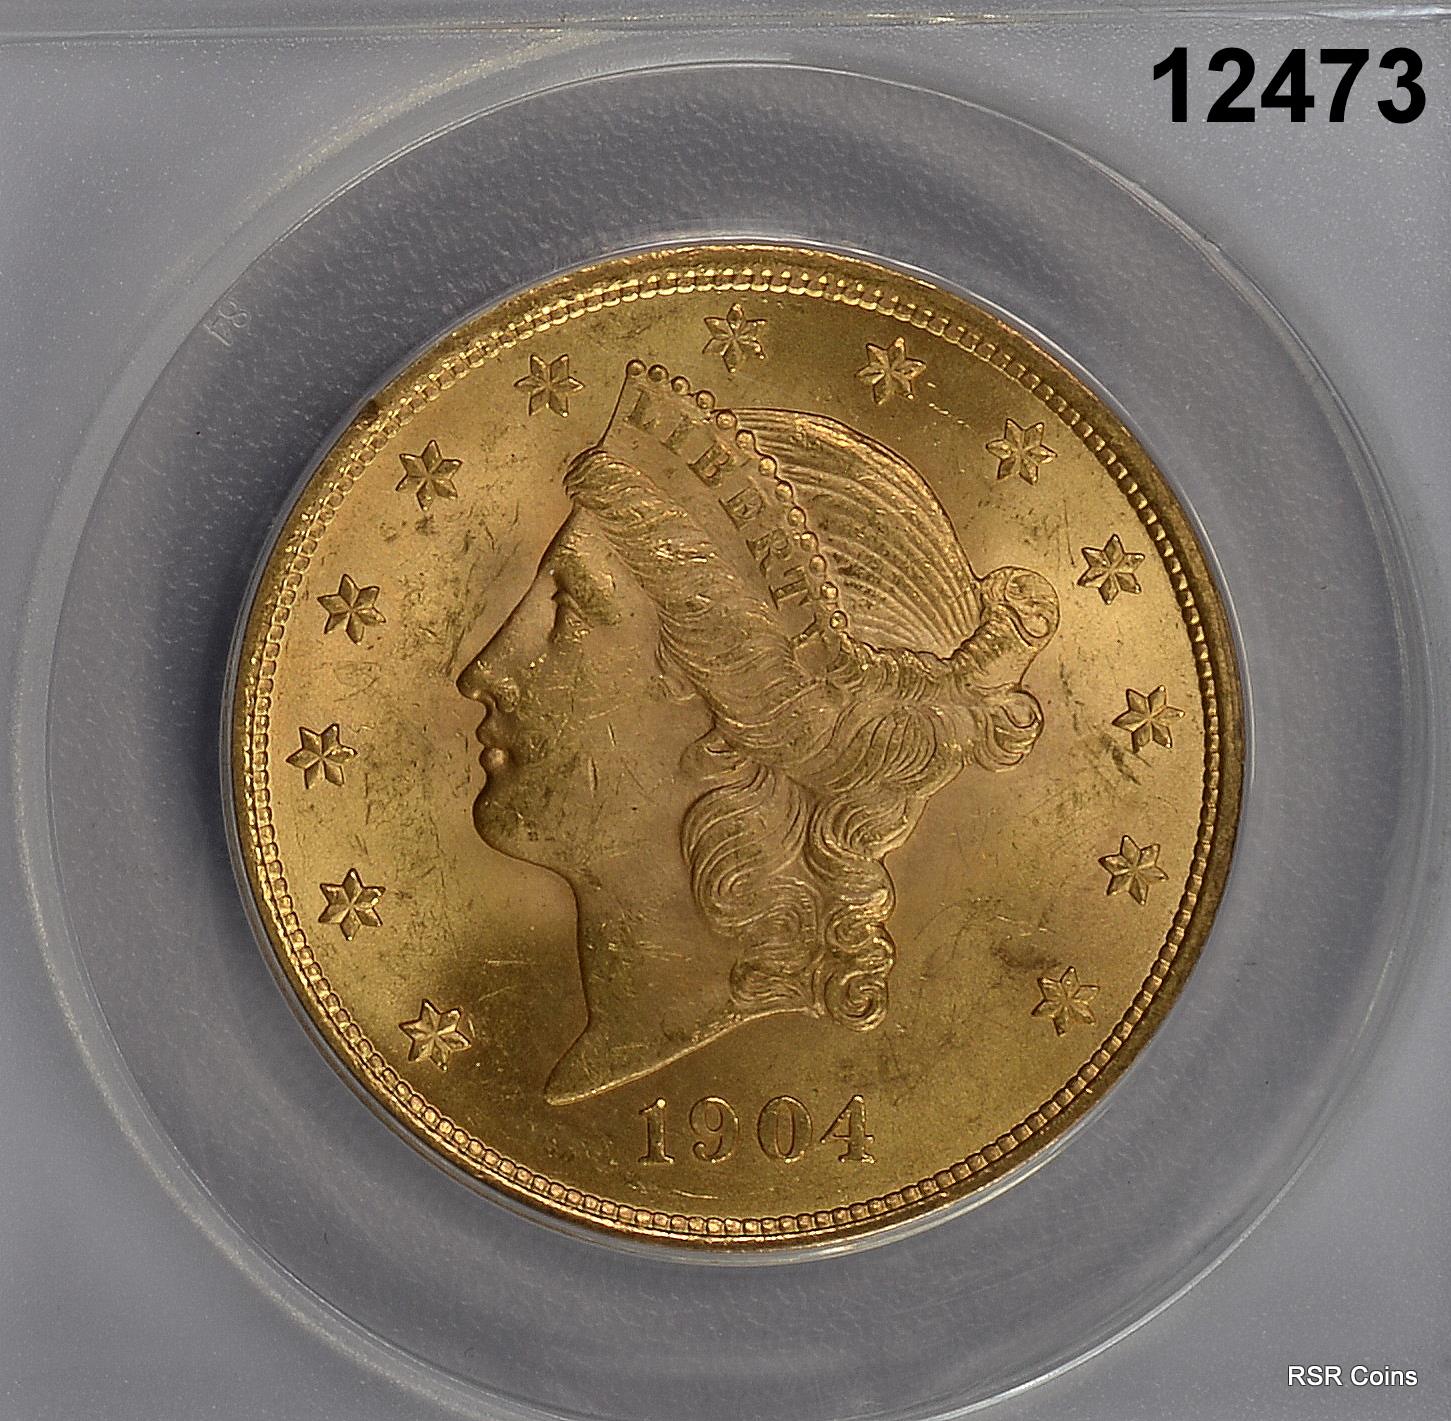 1904 $20 GOLD DOUBLE EAGLE LIBERTY ANACS CERTIFIED MS63 FLASHY NICE! #12473